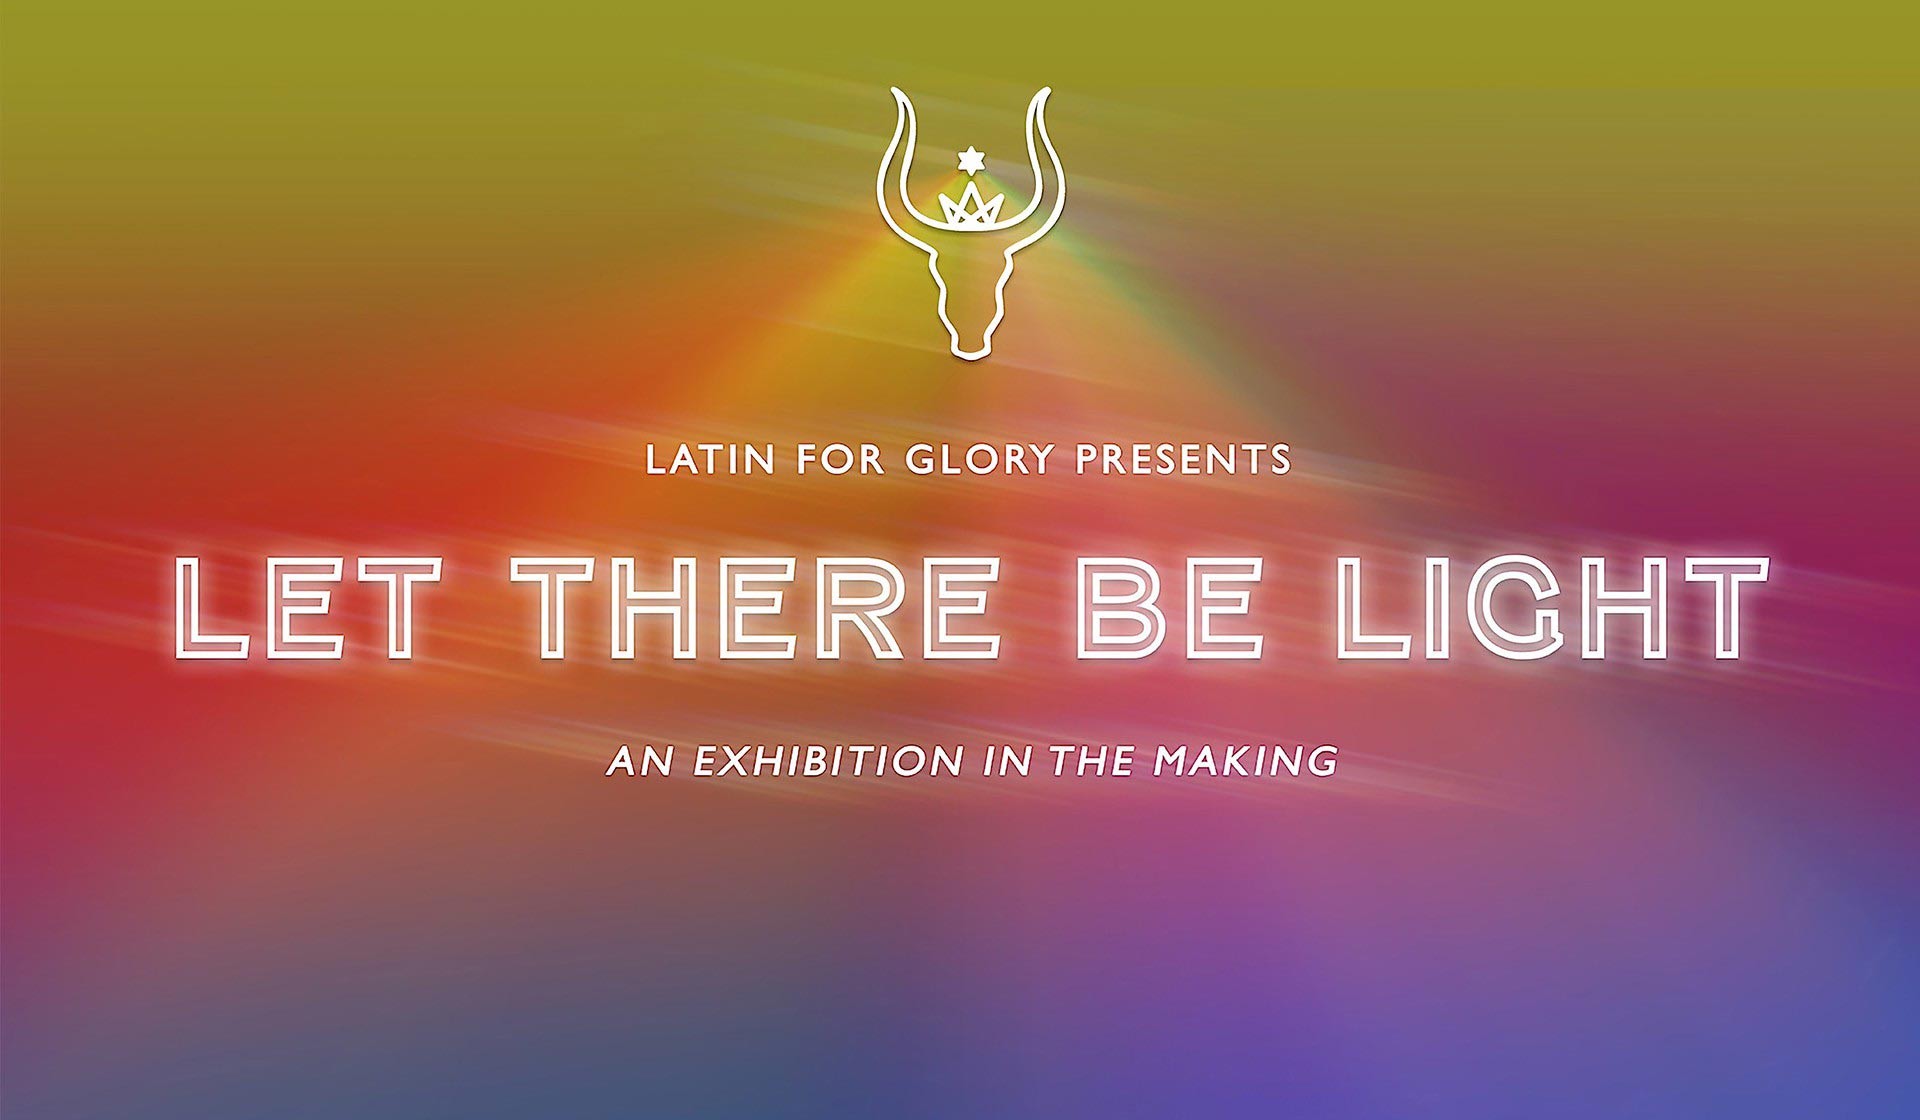 Latin for Glory presents